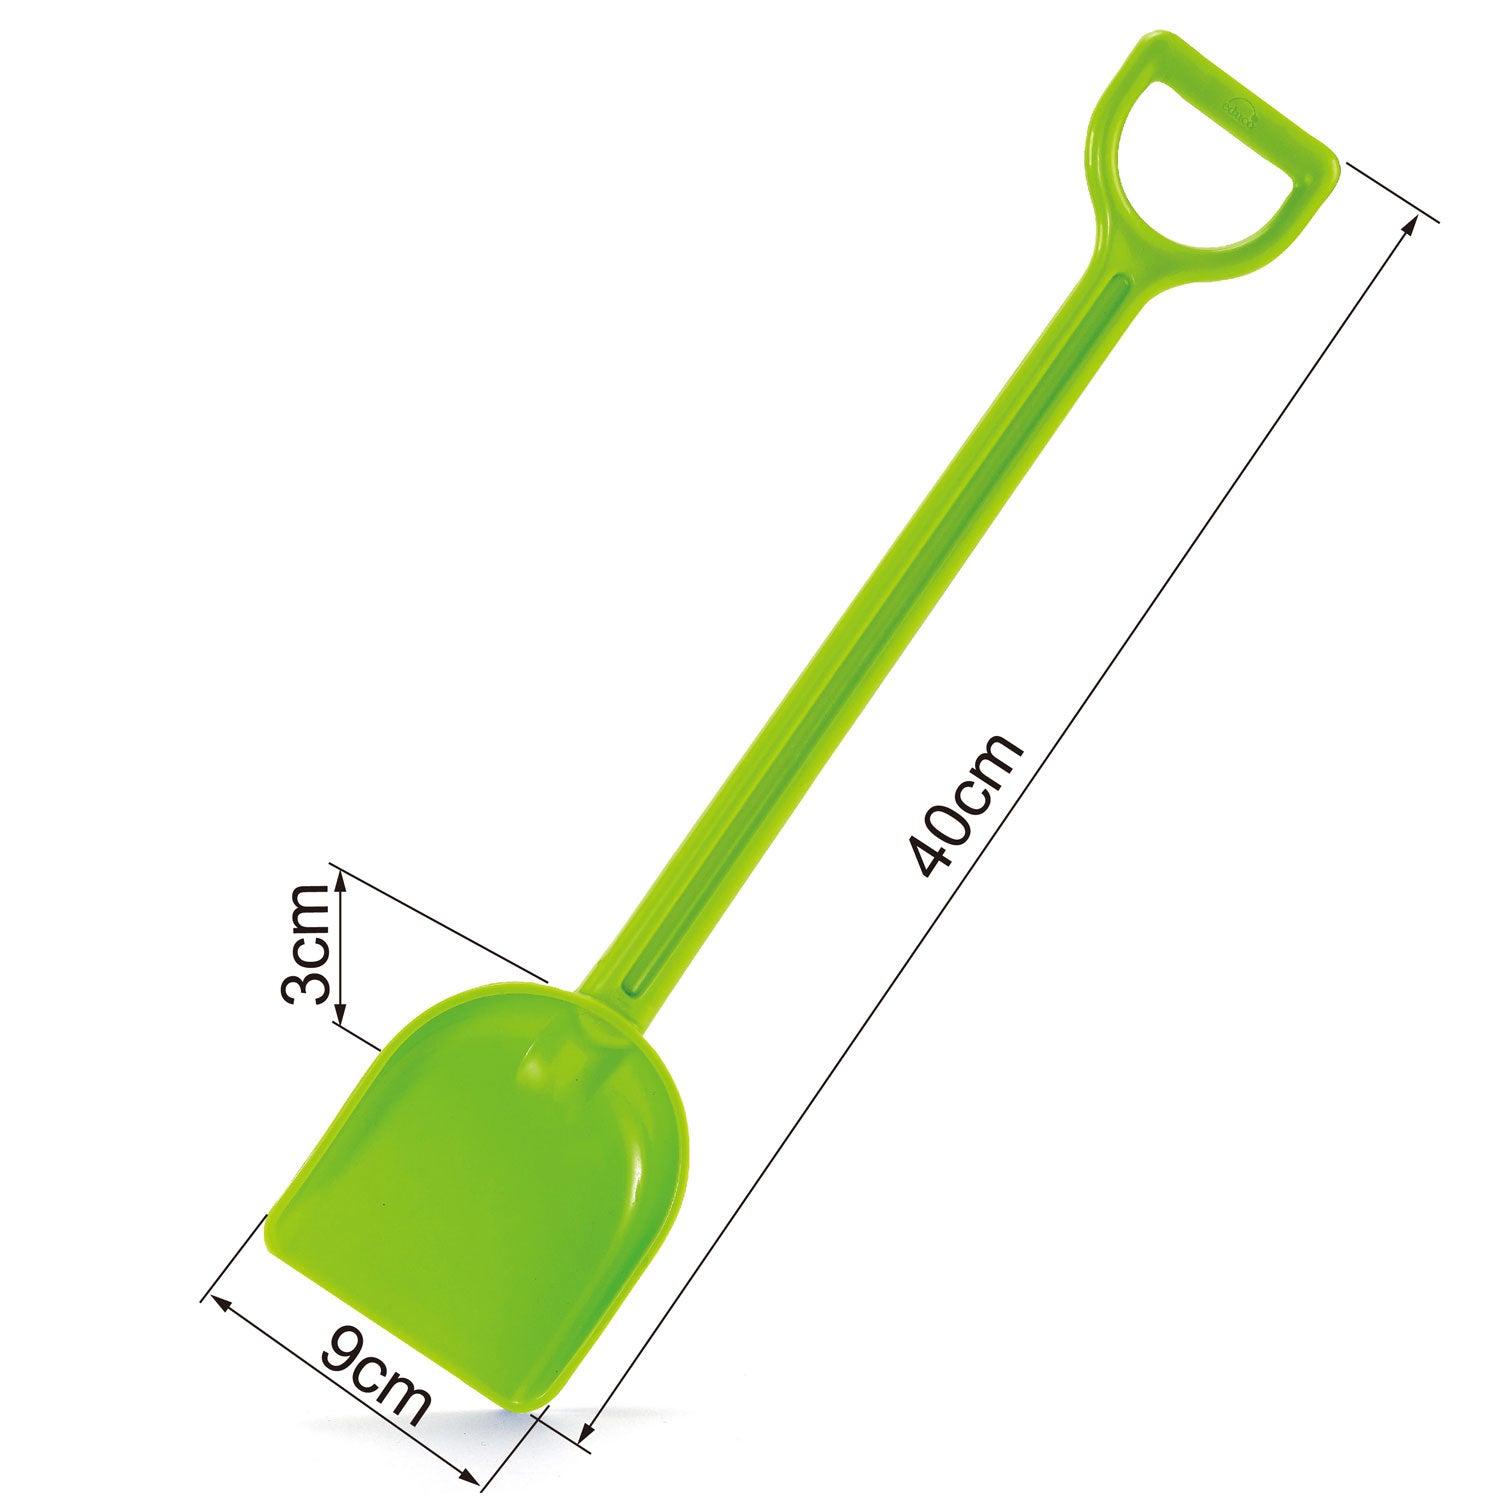 Hape Mighty Shovel, Green perfect for the sand or backyard play with quality outdoor toys The Toy Wagon